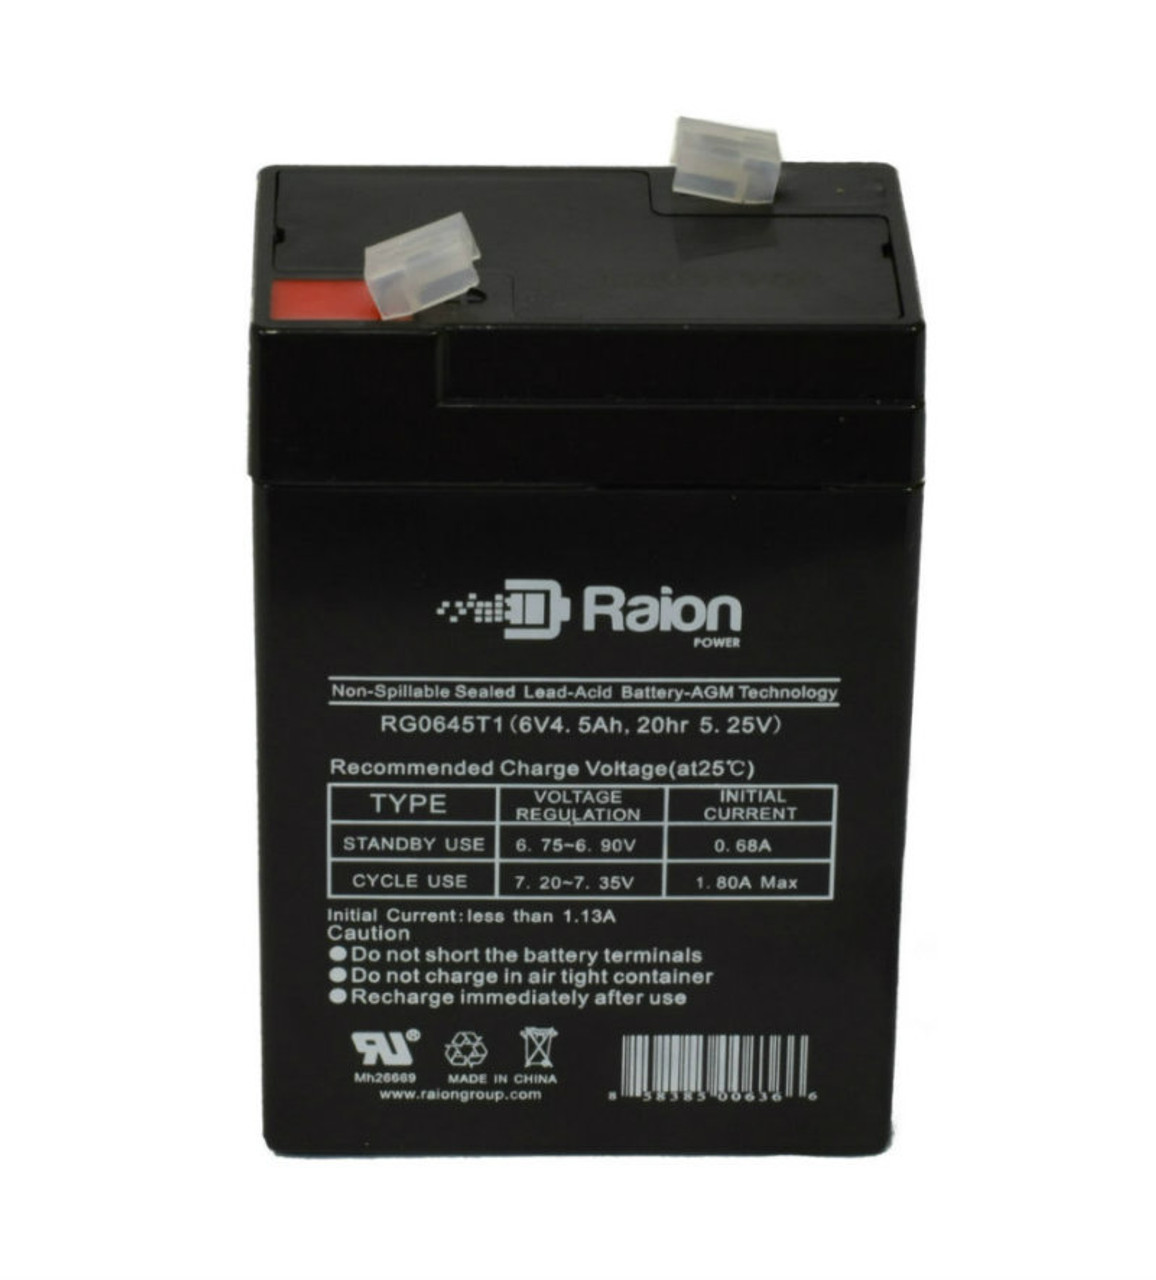 Raion Power RG0645T1 Replacement Battery Cartridge for BB BP4-6